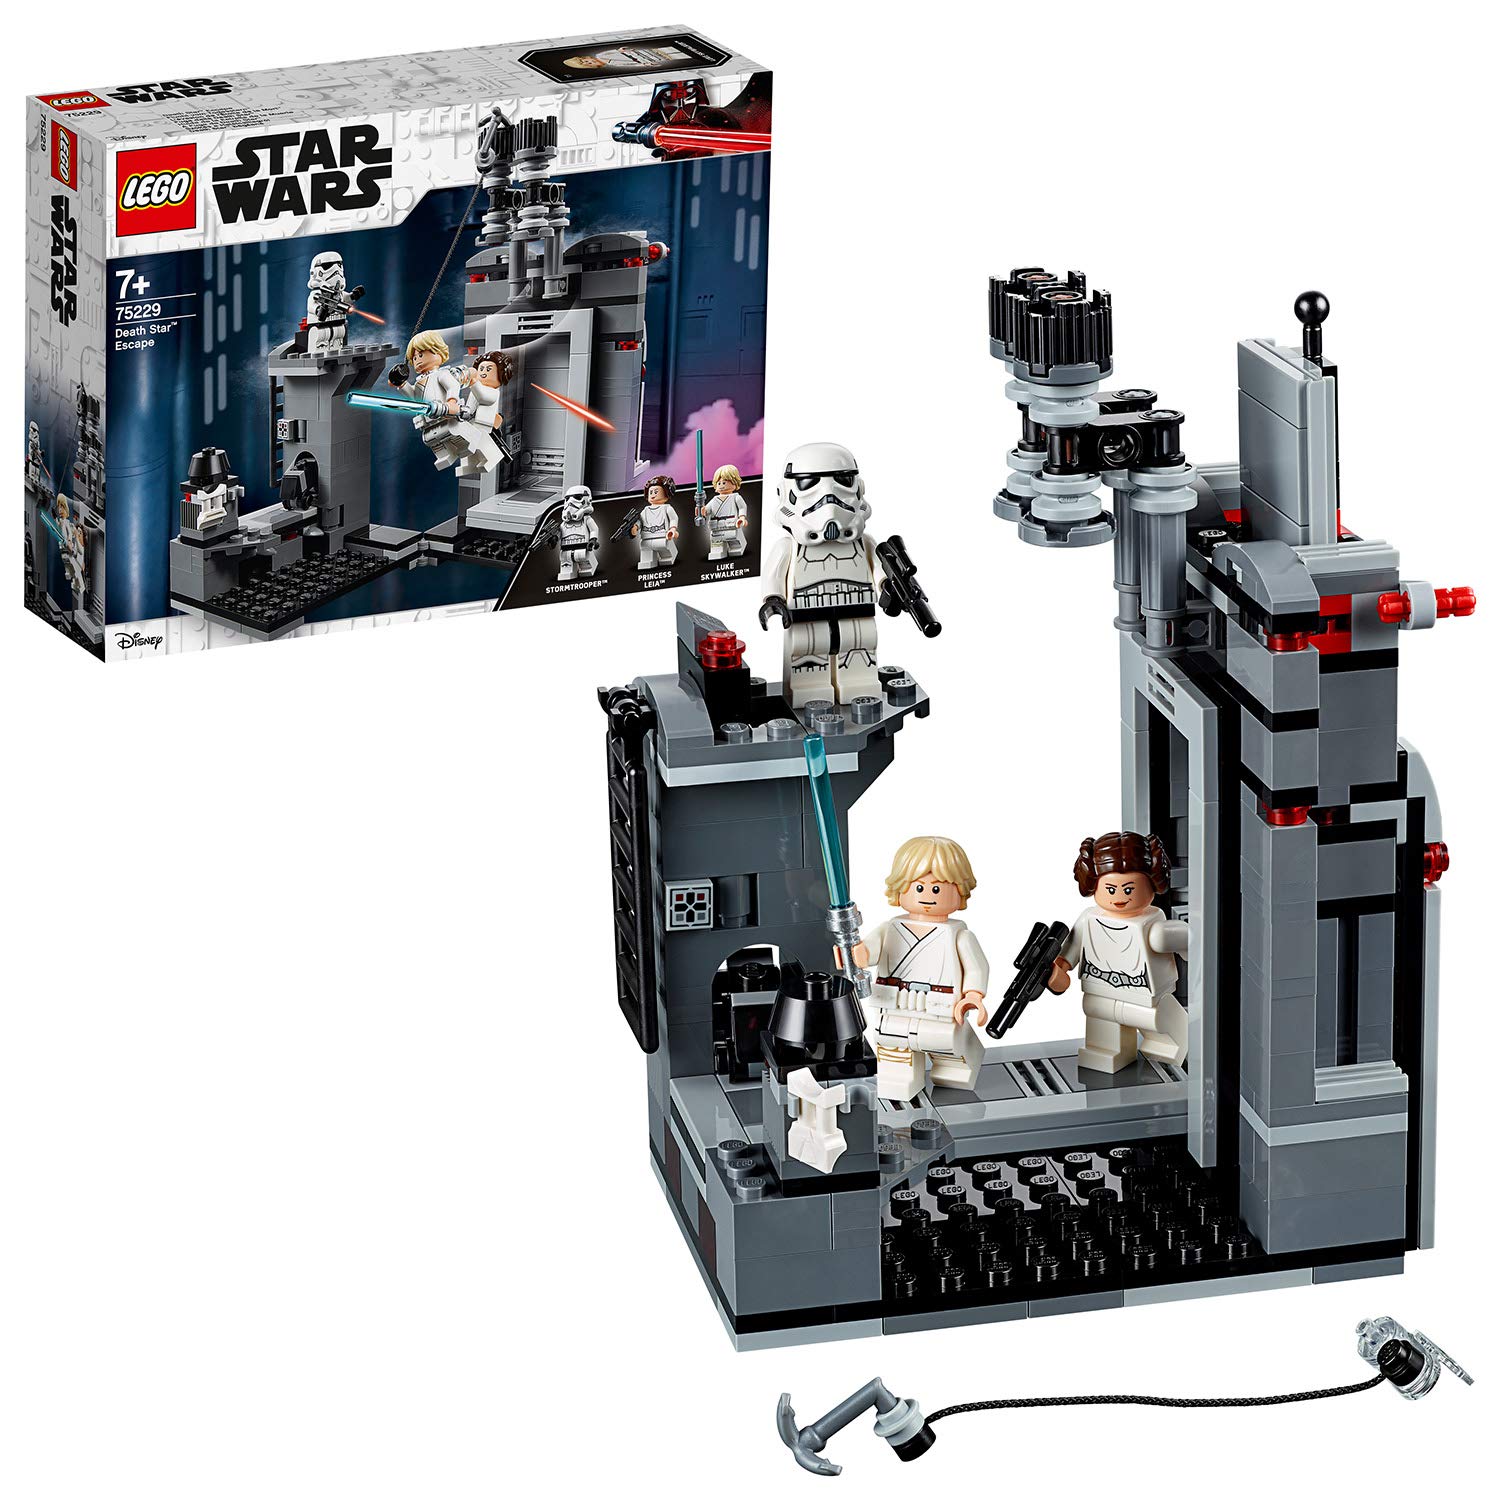 Lego Star Wars 75229 - Escape From The Death Star